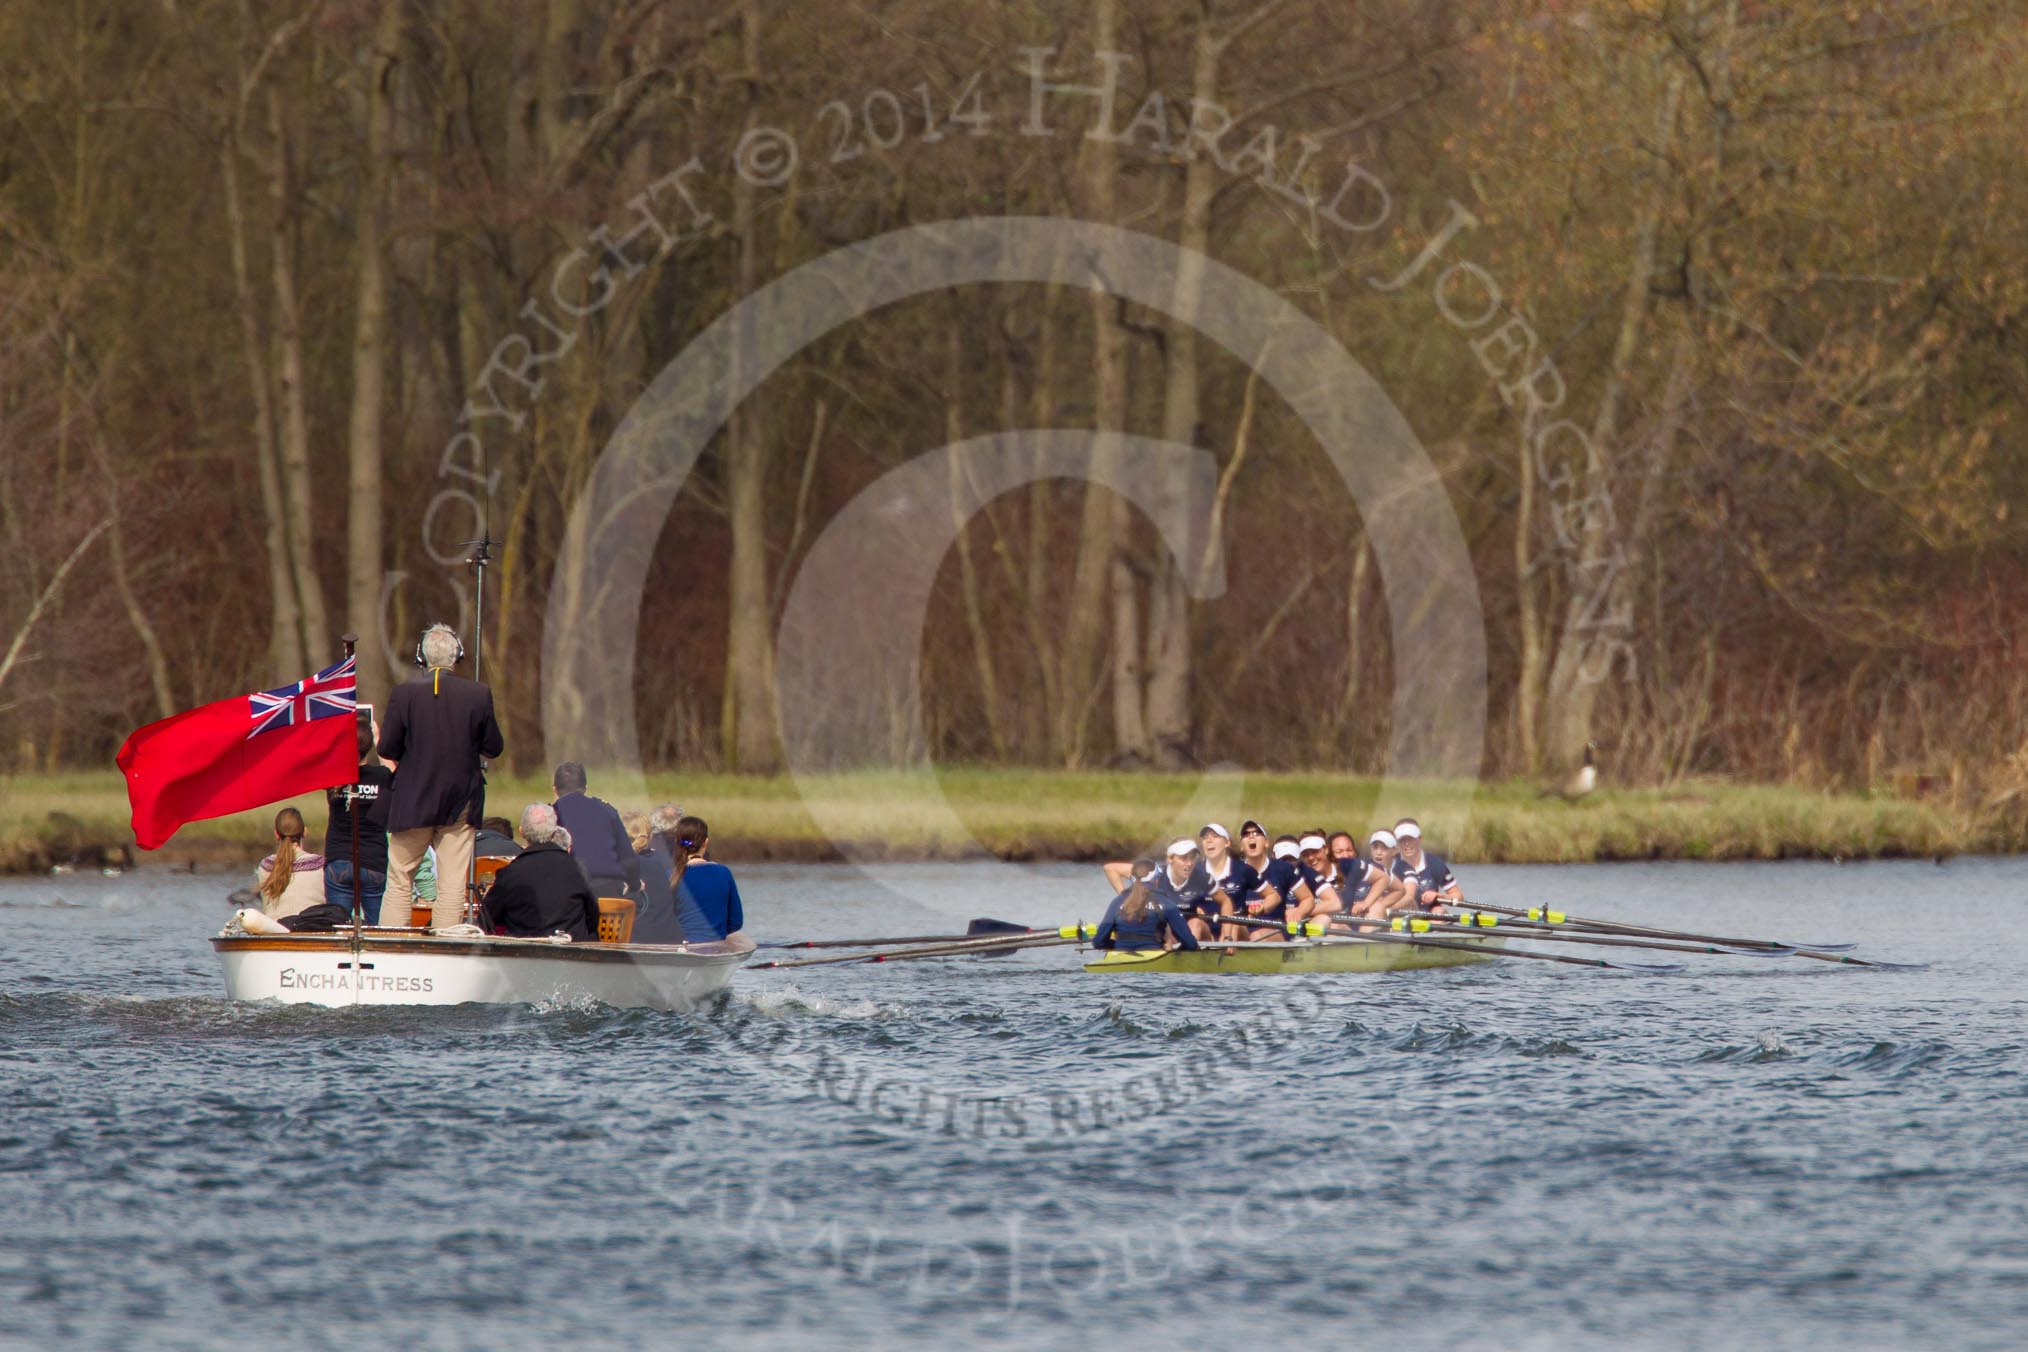 The Women's Boat Race and Henley Boat Races 2014: The Women's Reserves - Osiris v. Blondie race. Osiris (Oxford) has just won the race..
River Thames,
Henley-on-Thames,
Buckinghamshire,
United Kingdom,
on 30 March 2014 at 14:18, image #181